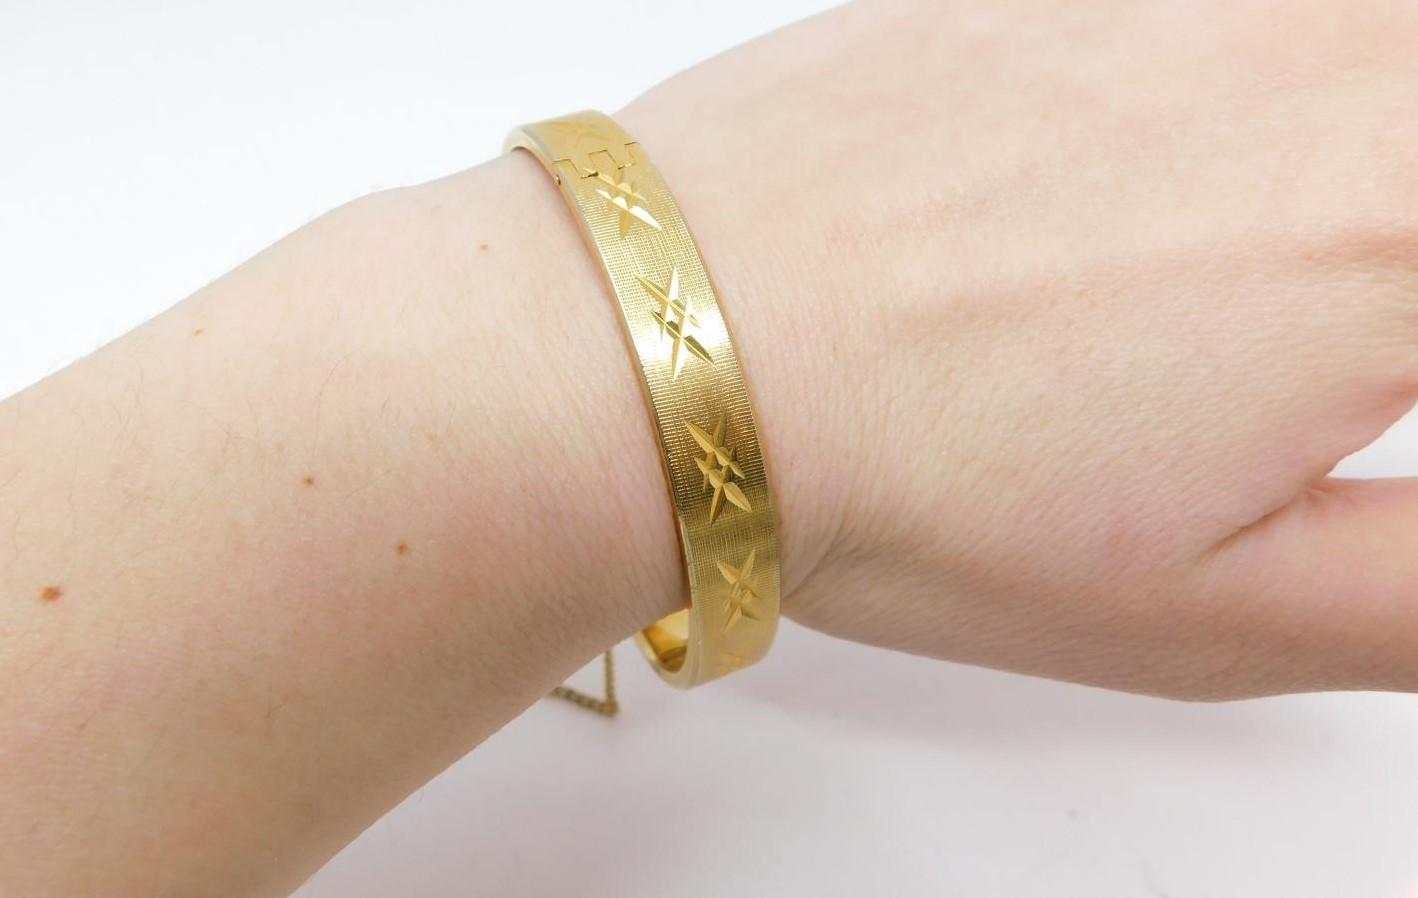 A collection of vintage jewellery inlcuding an 18 carat rolled gold bangle with star cur design, a - Image 20 of 28